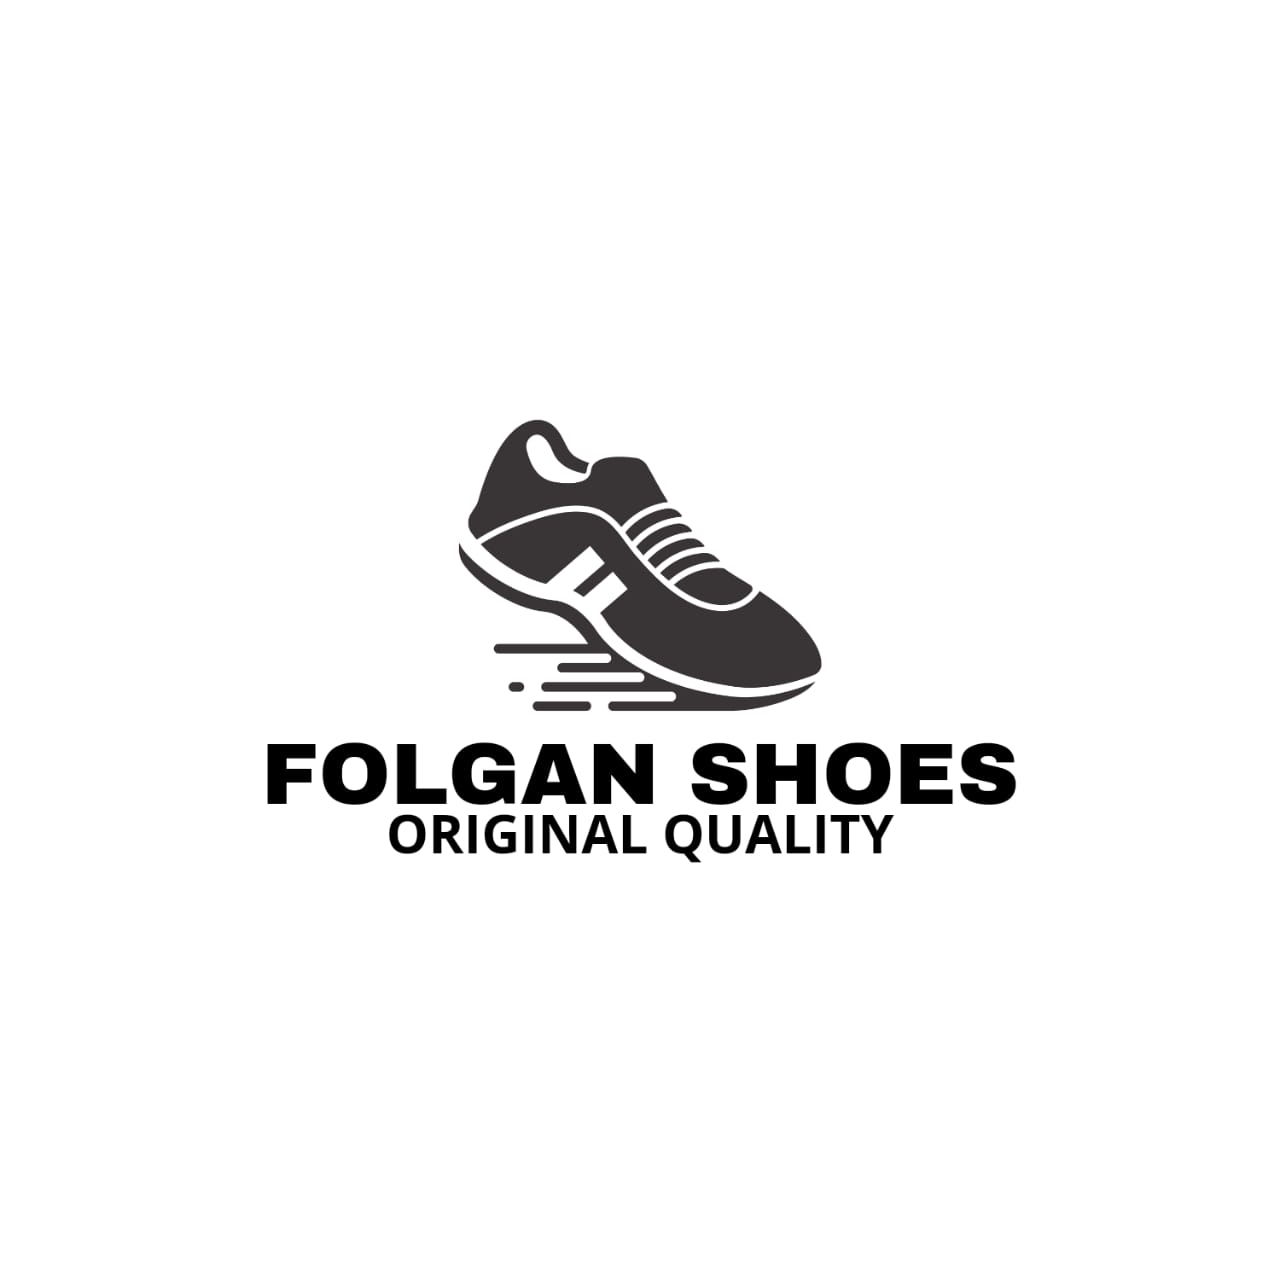 Black and white logo for a shoe company.